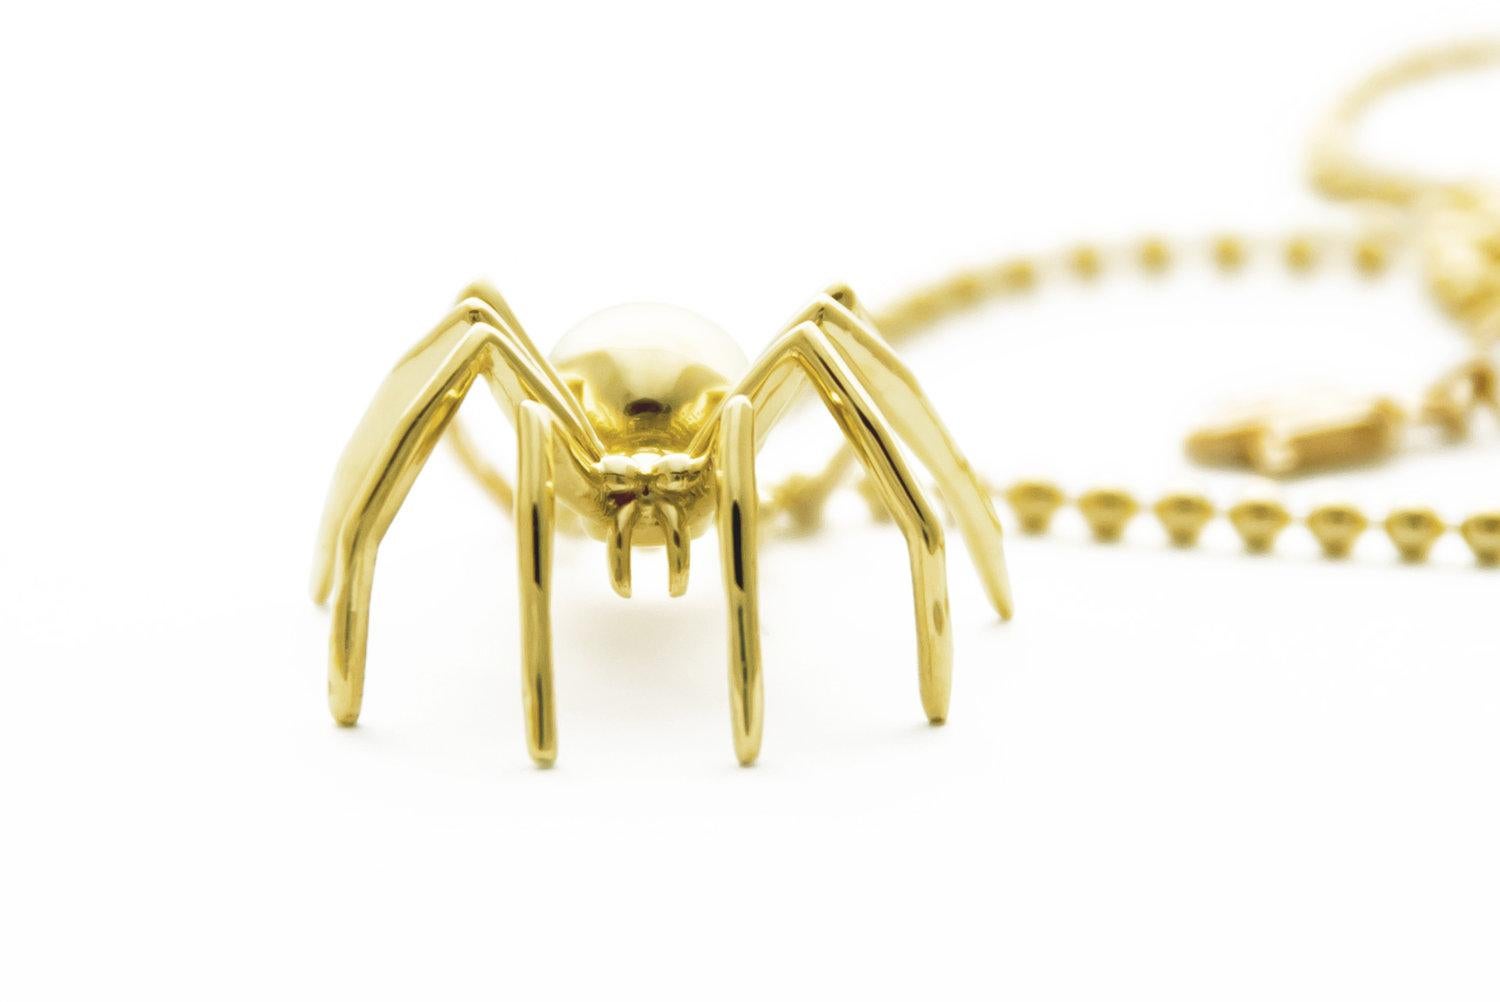 Discover the enchanting beauty of the Medium Spider Pendant Solid Yellow Gold, an exquisite symbol of creativity and self-determination. For centuries, the spider has captivated our imagination as a master of its own destiny, embodying the power of